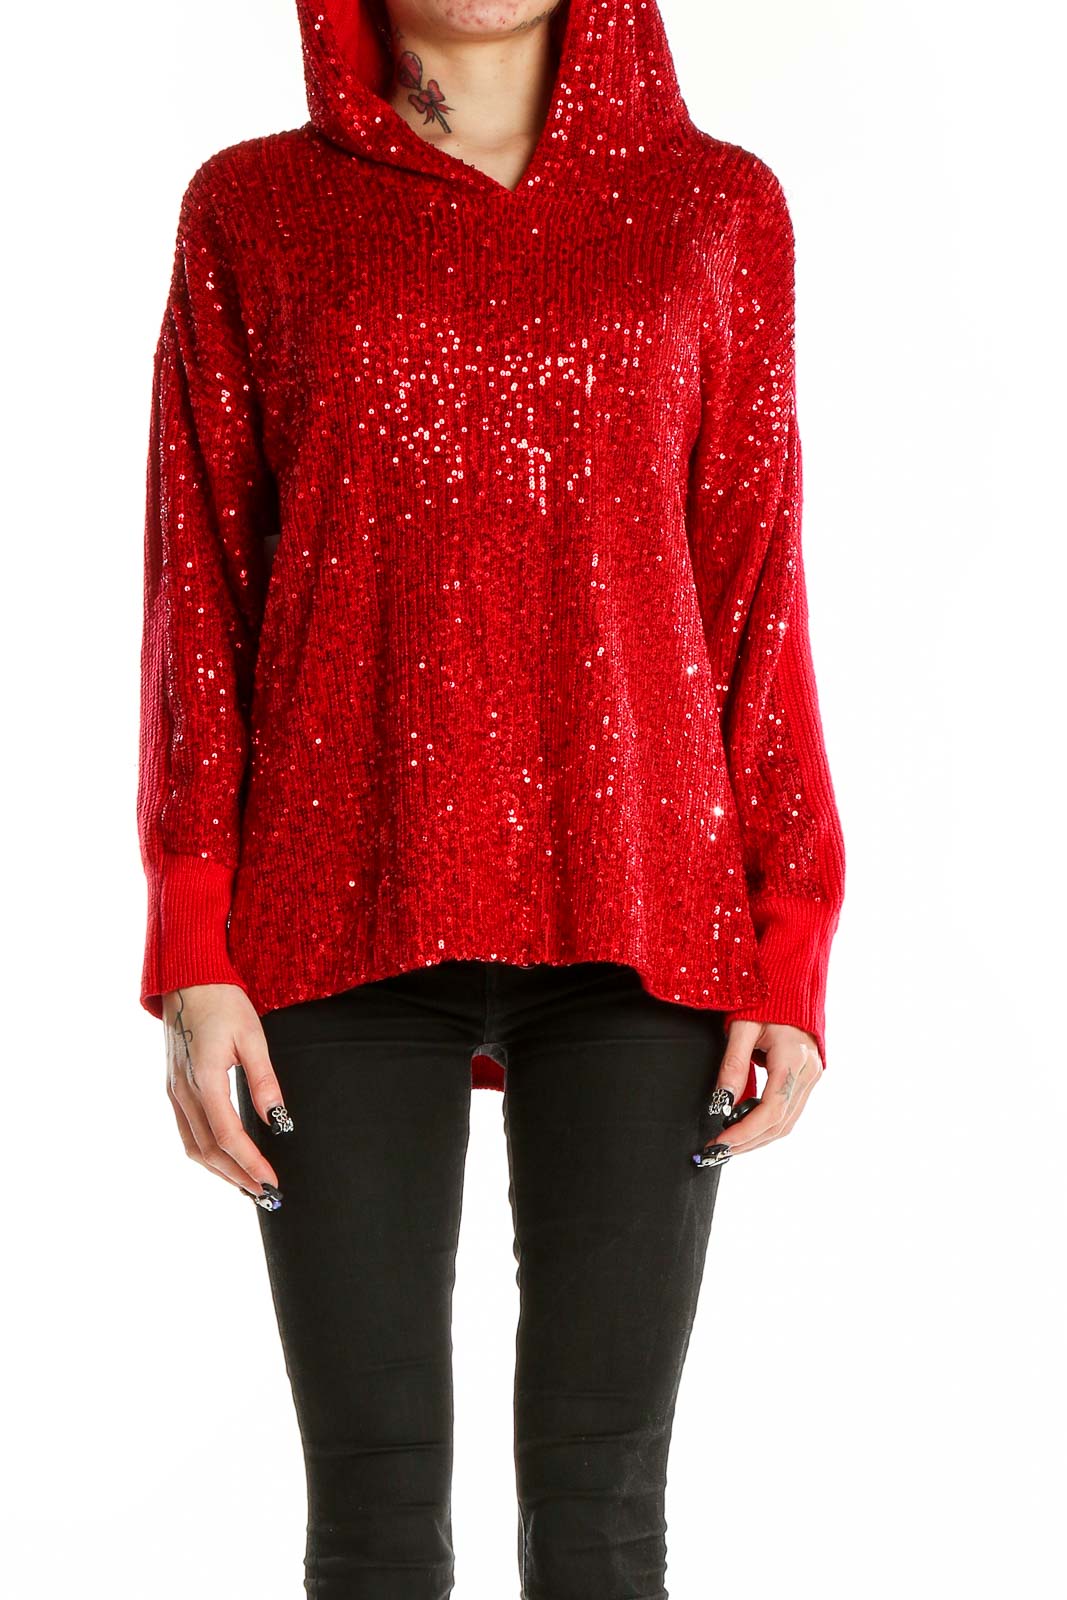 Red Hooded Sequin Sweater Front